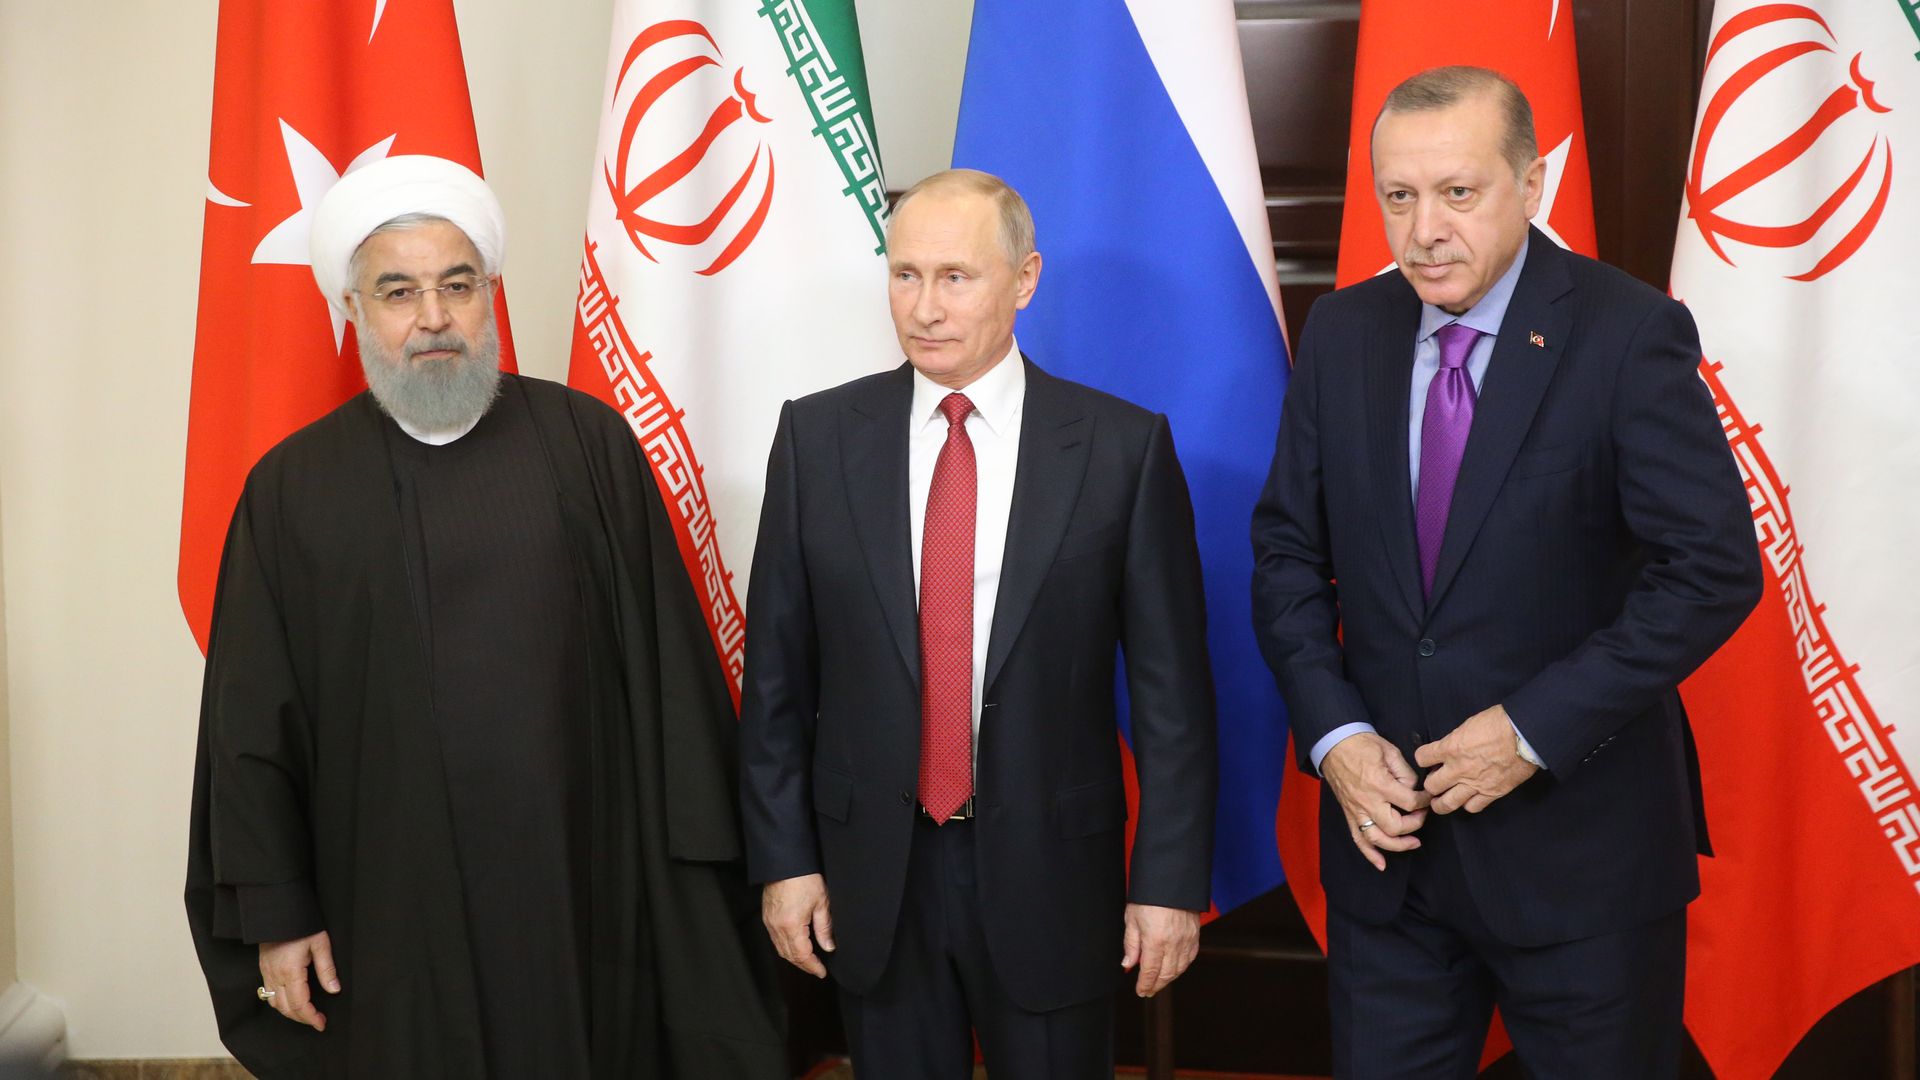 Rouhani, Putin, and Erdogan standing in front of national flags